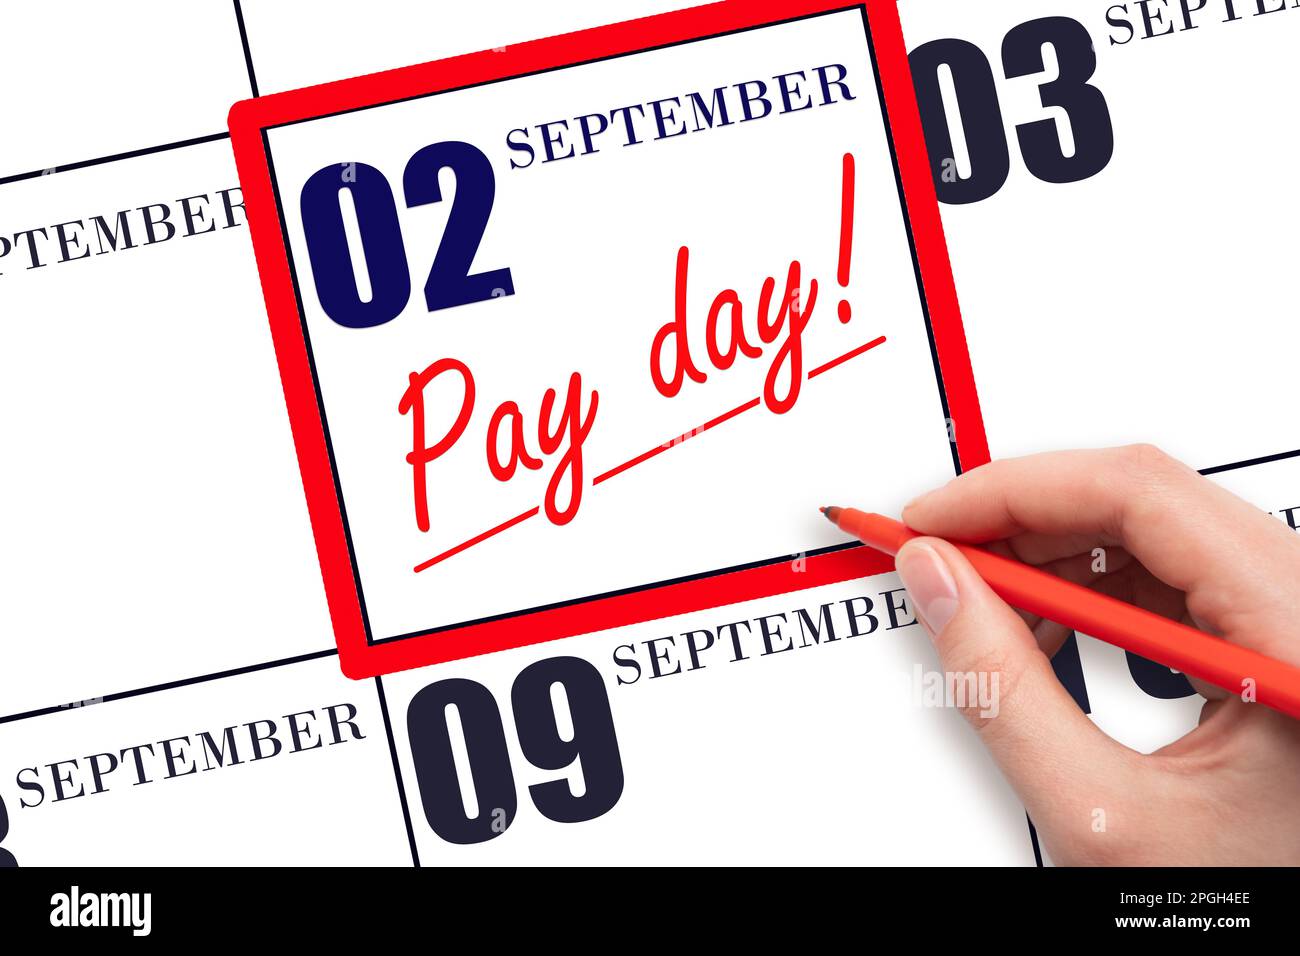 2nd day of September. Hand writing text PAY DATE on calendar date September 2 and underline it. Payment due date. Reminder concept of payment. Autumn Stock Photo